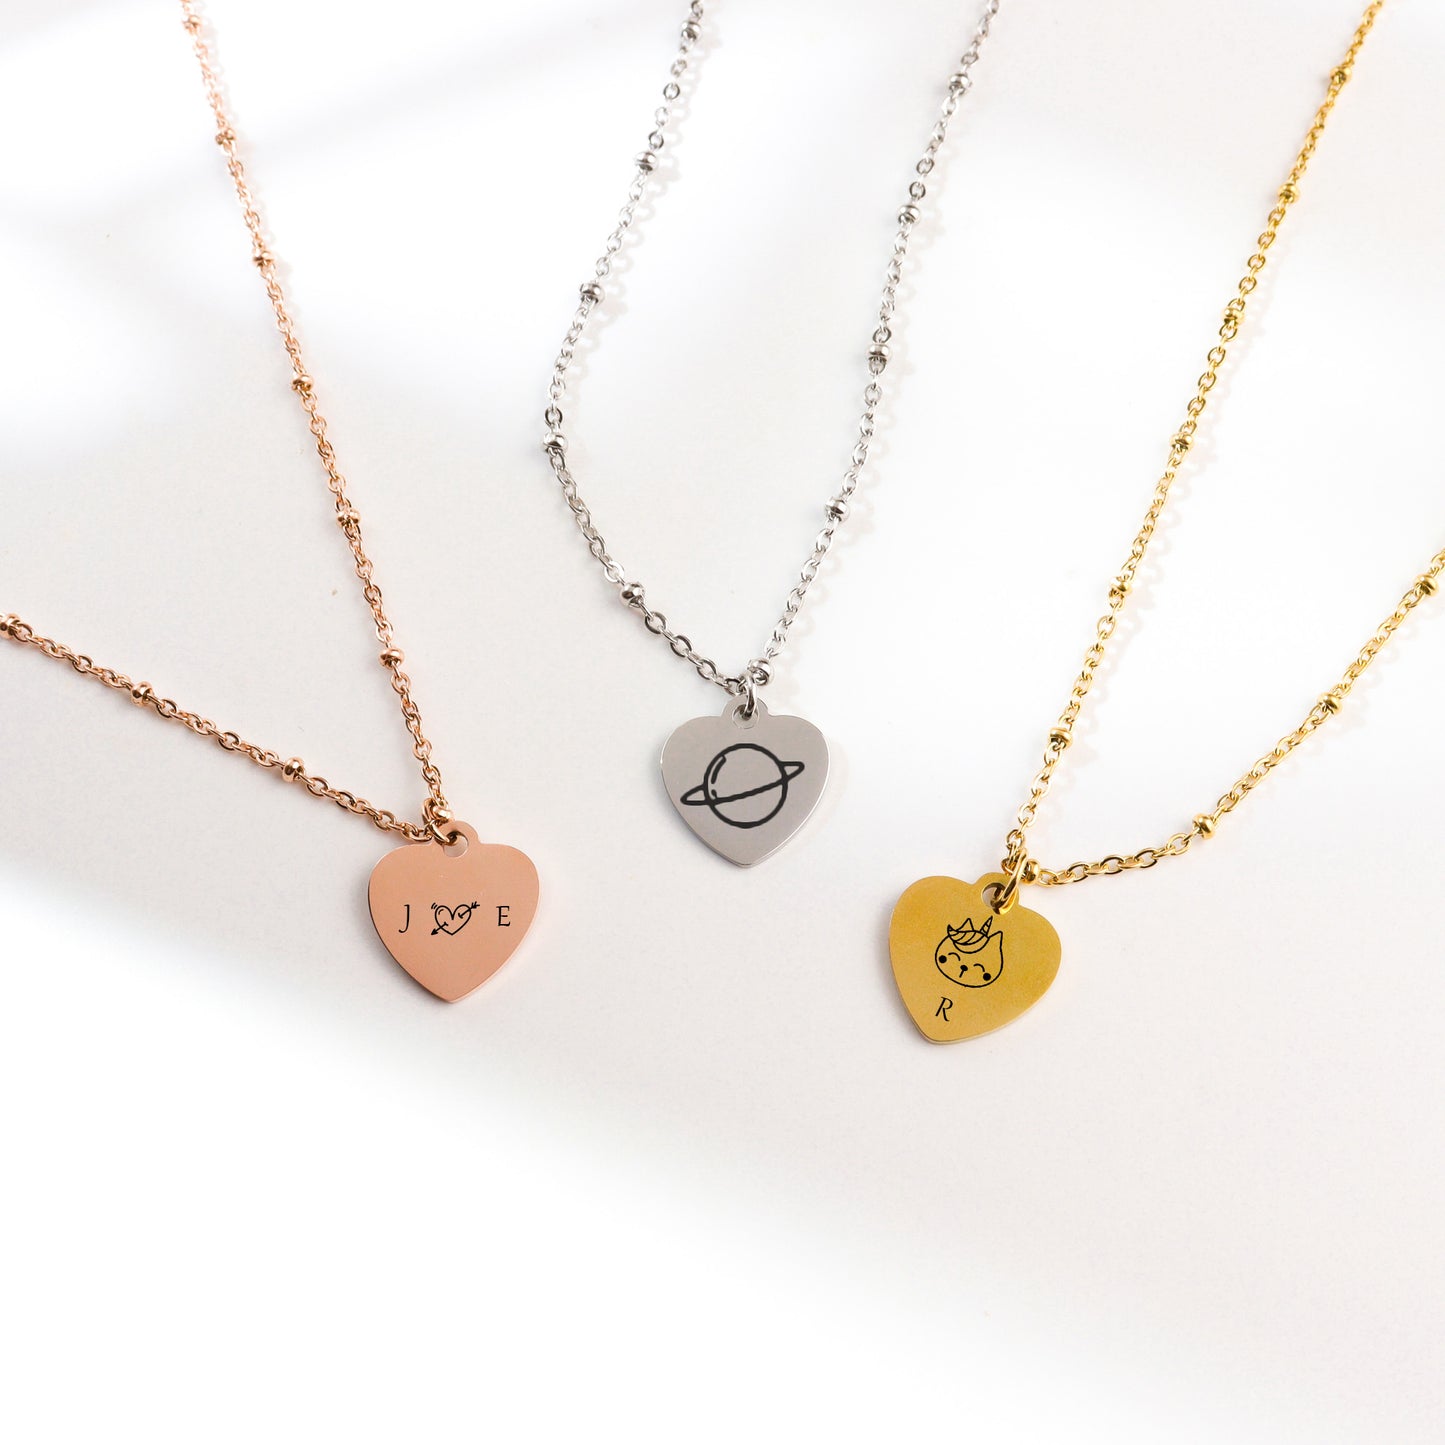 Engrave Your Necklace - Love